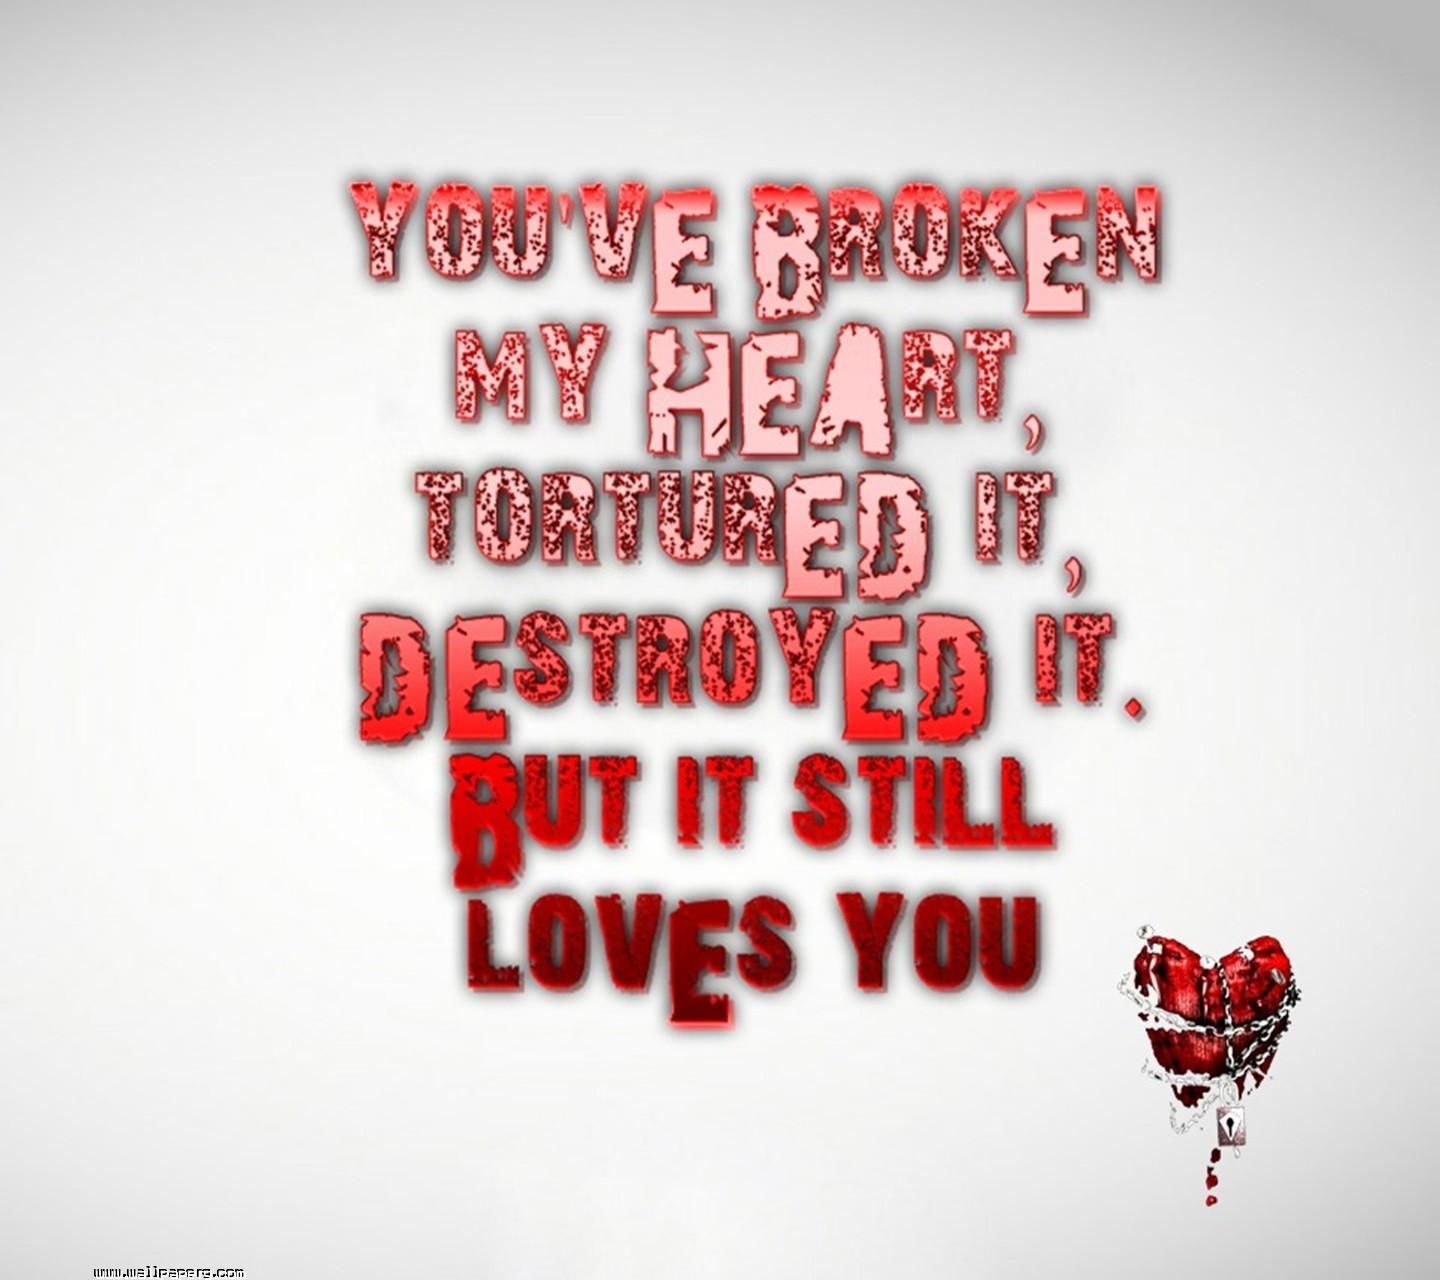 Download Broken heart(3)(1) wallpaper for your mobile cell phone